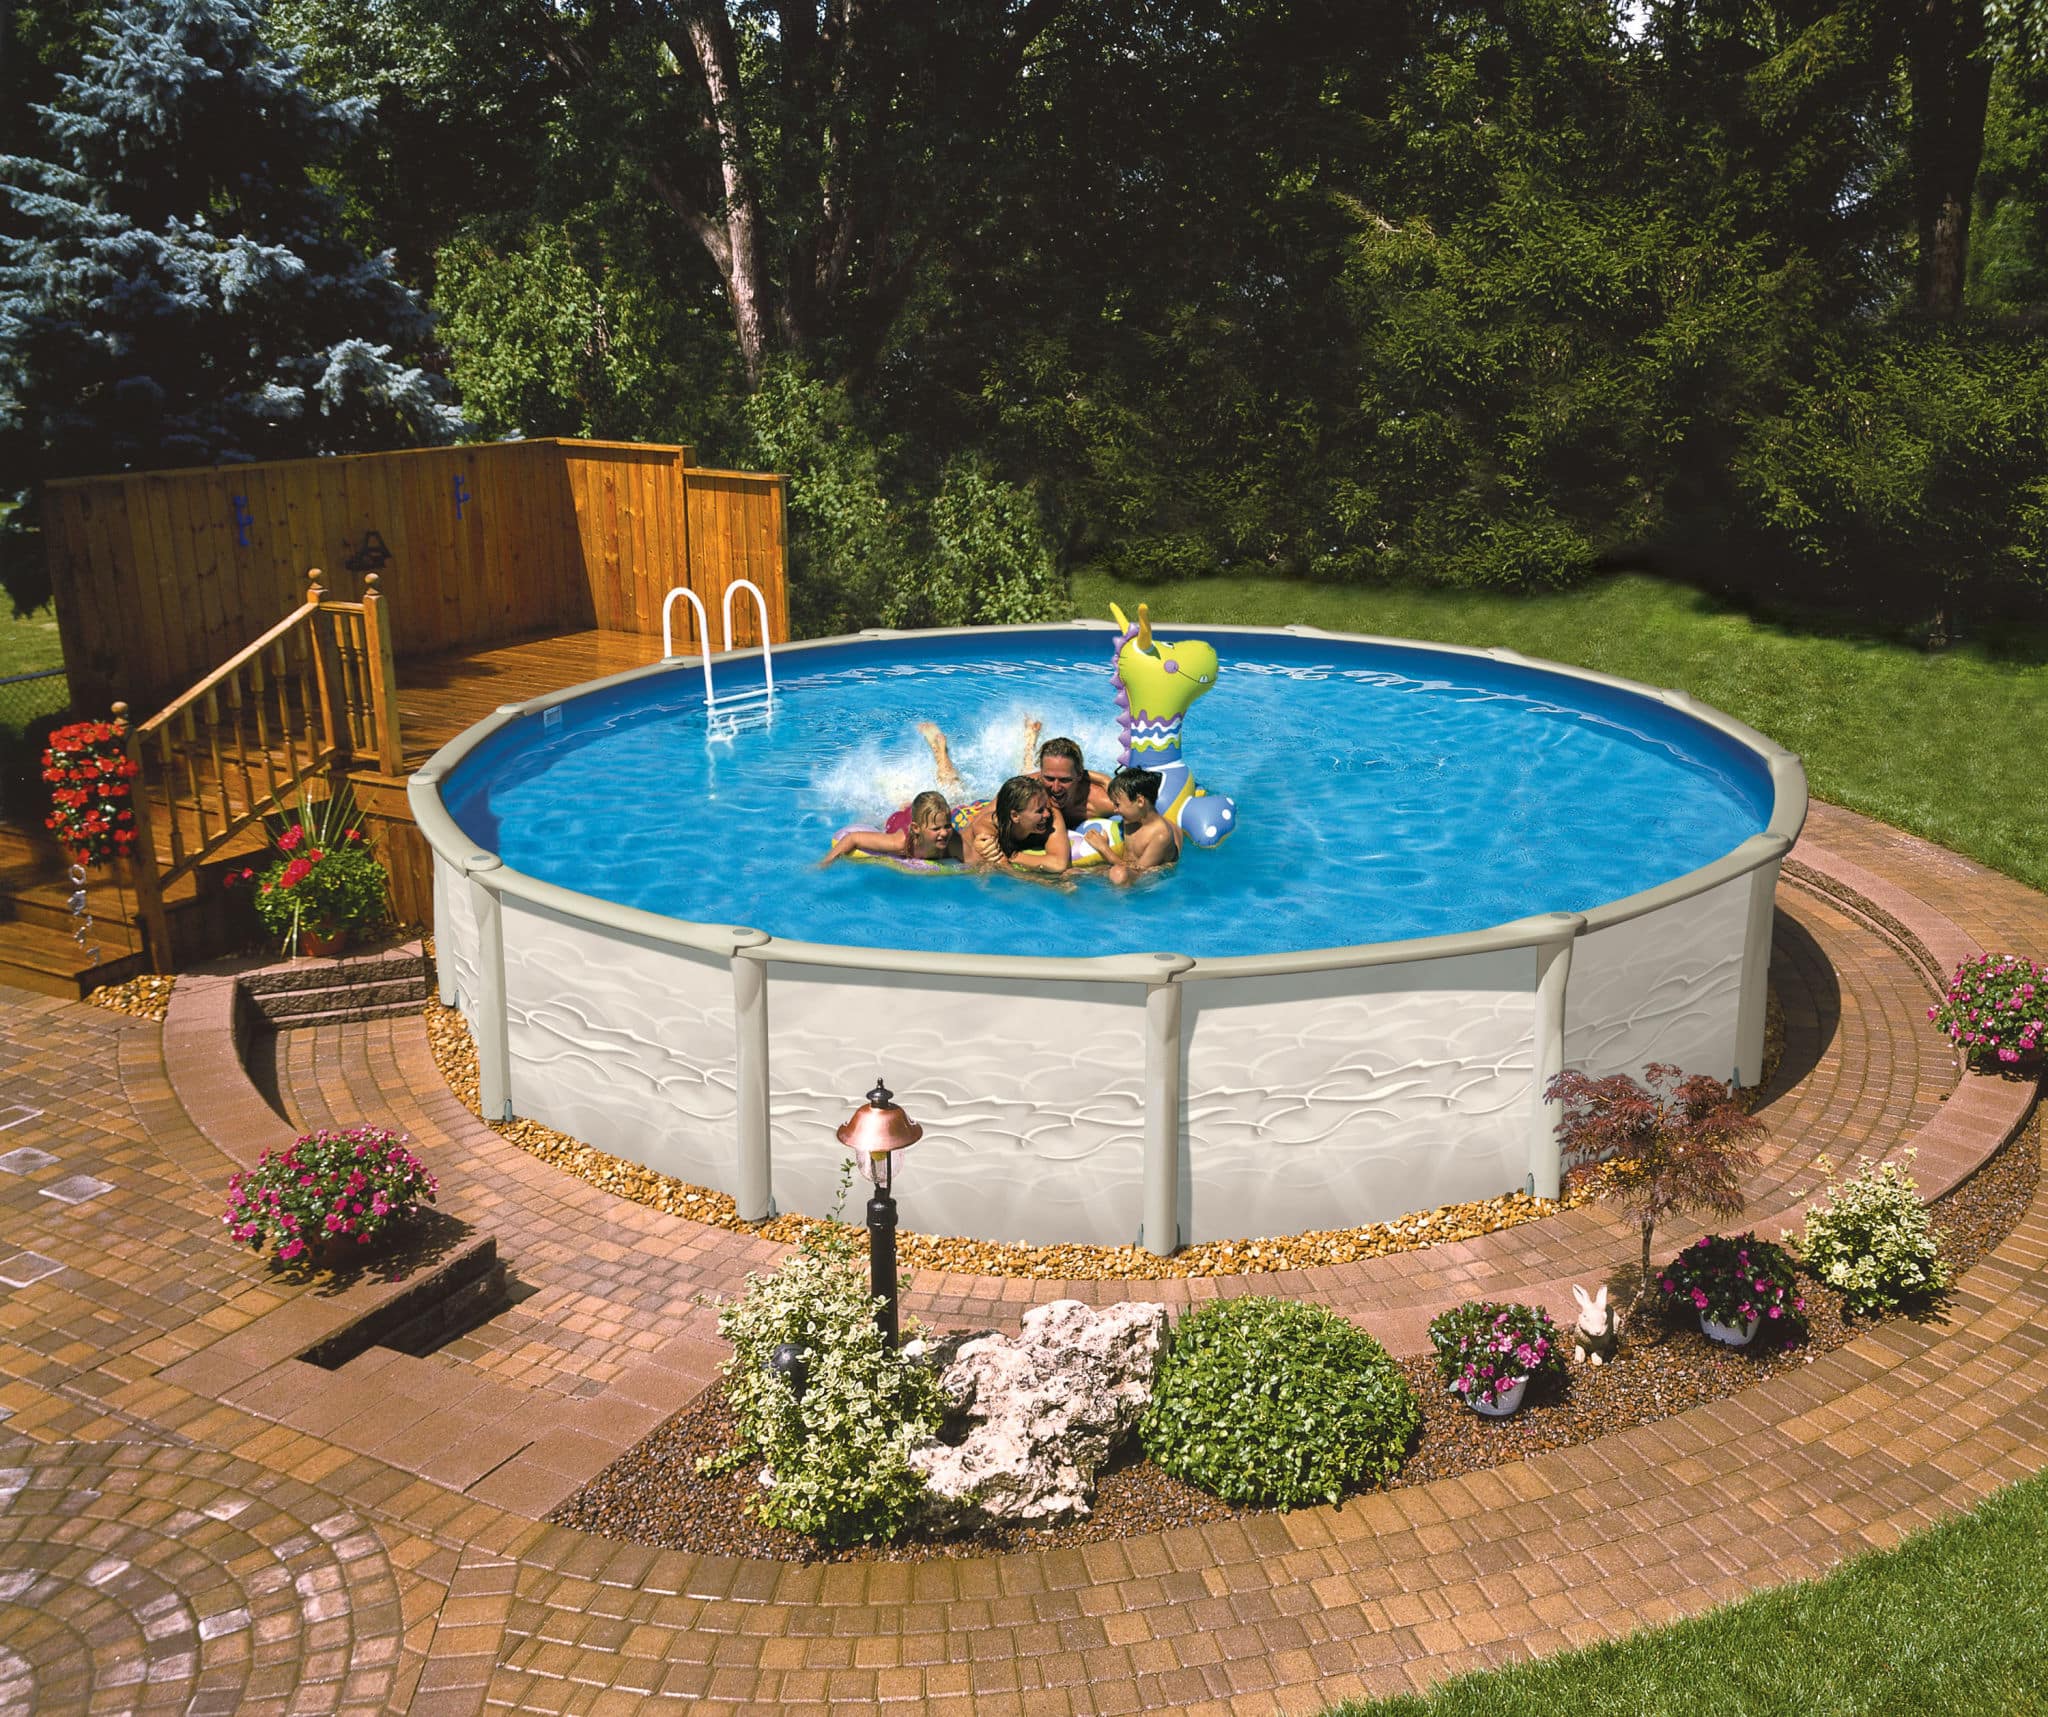 New The Circular Base Of An Above Ground Swimming Pool for Small Space